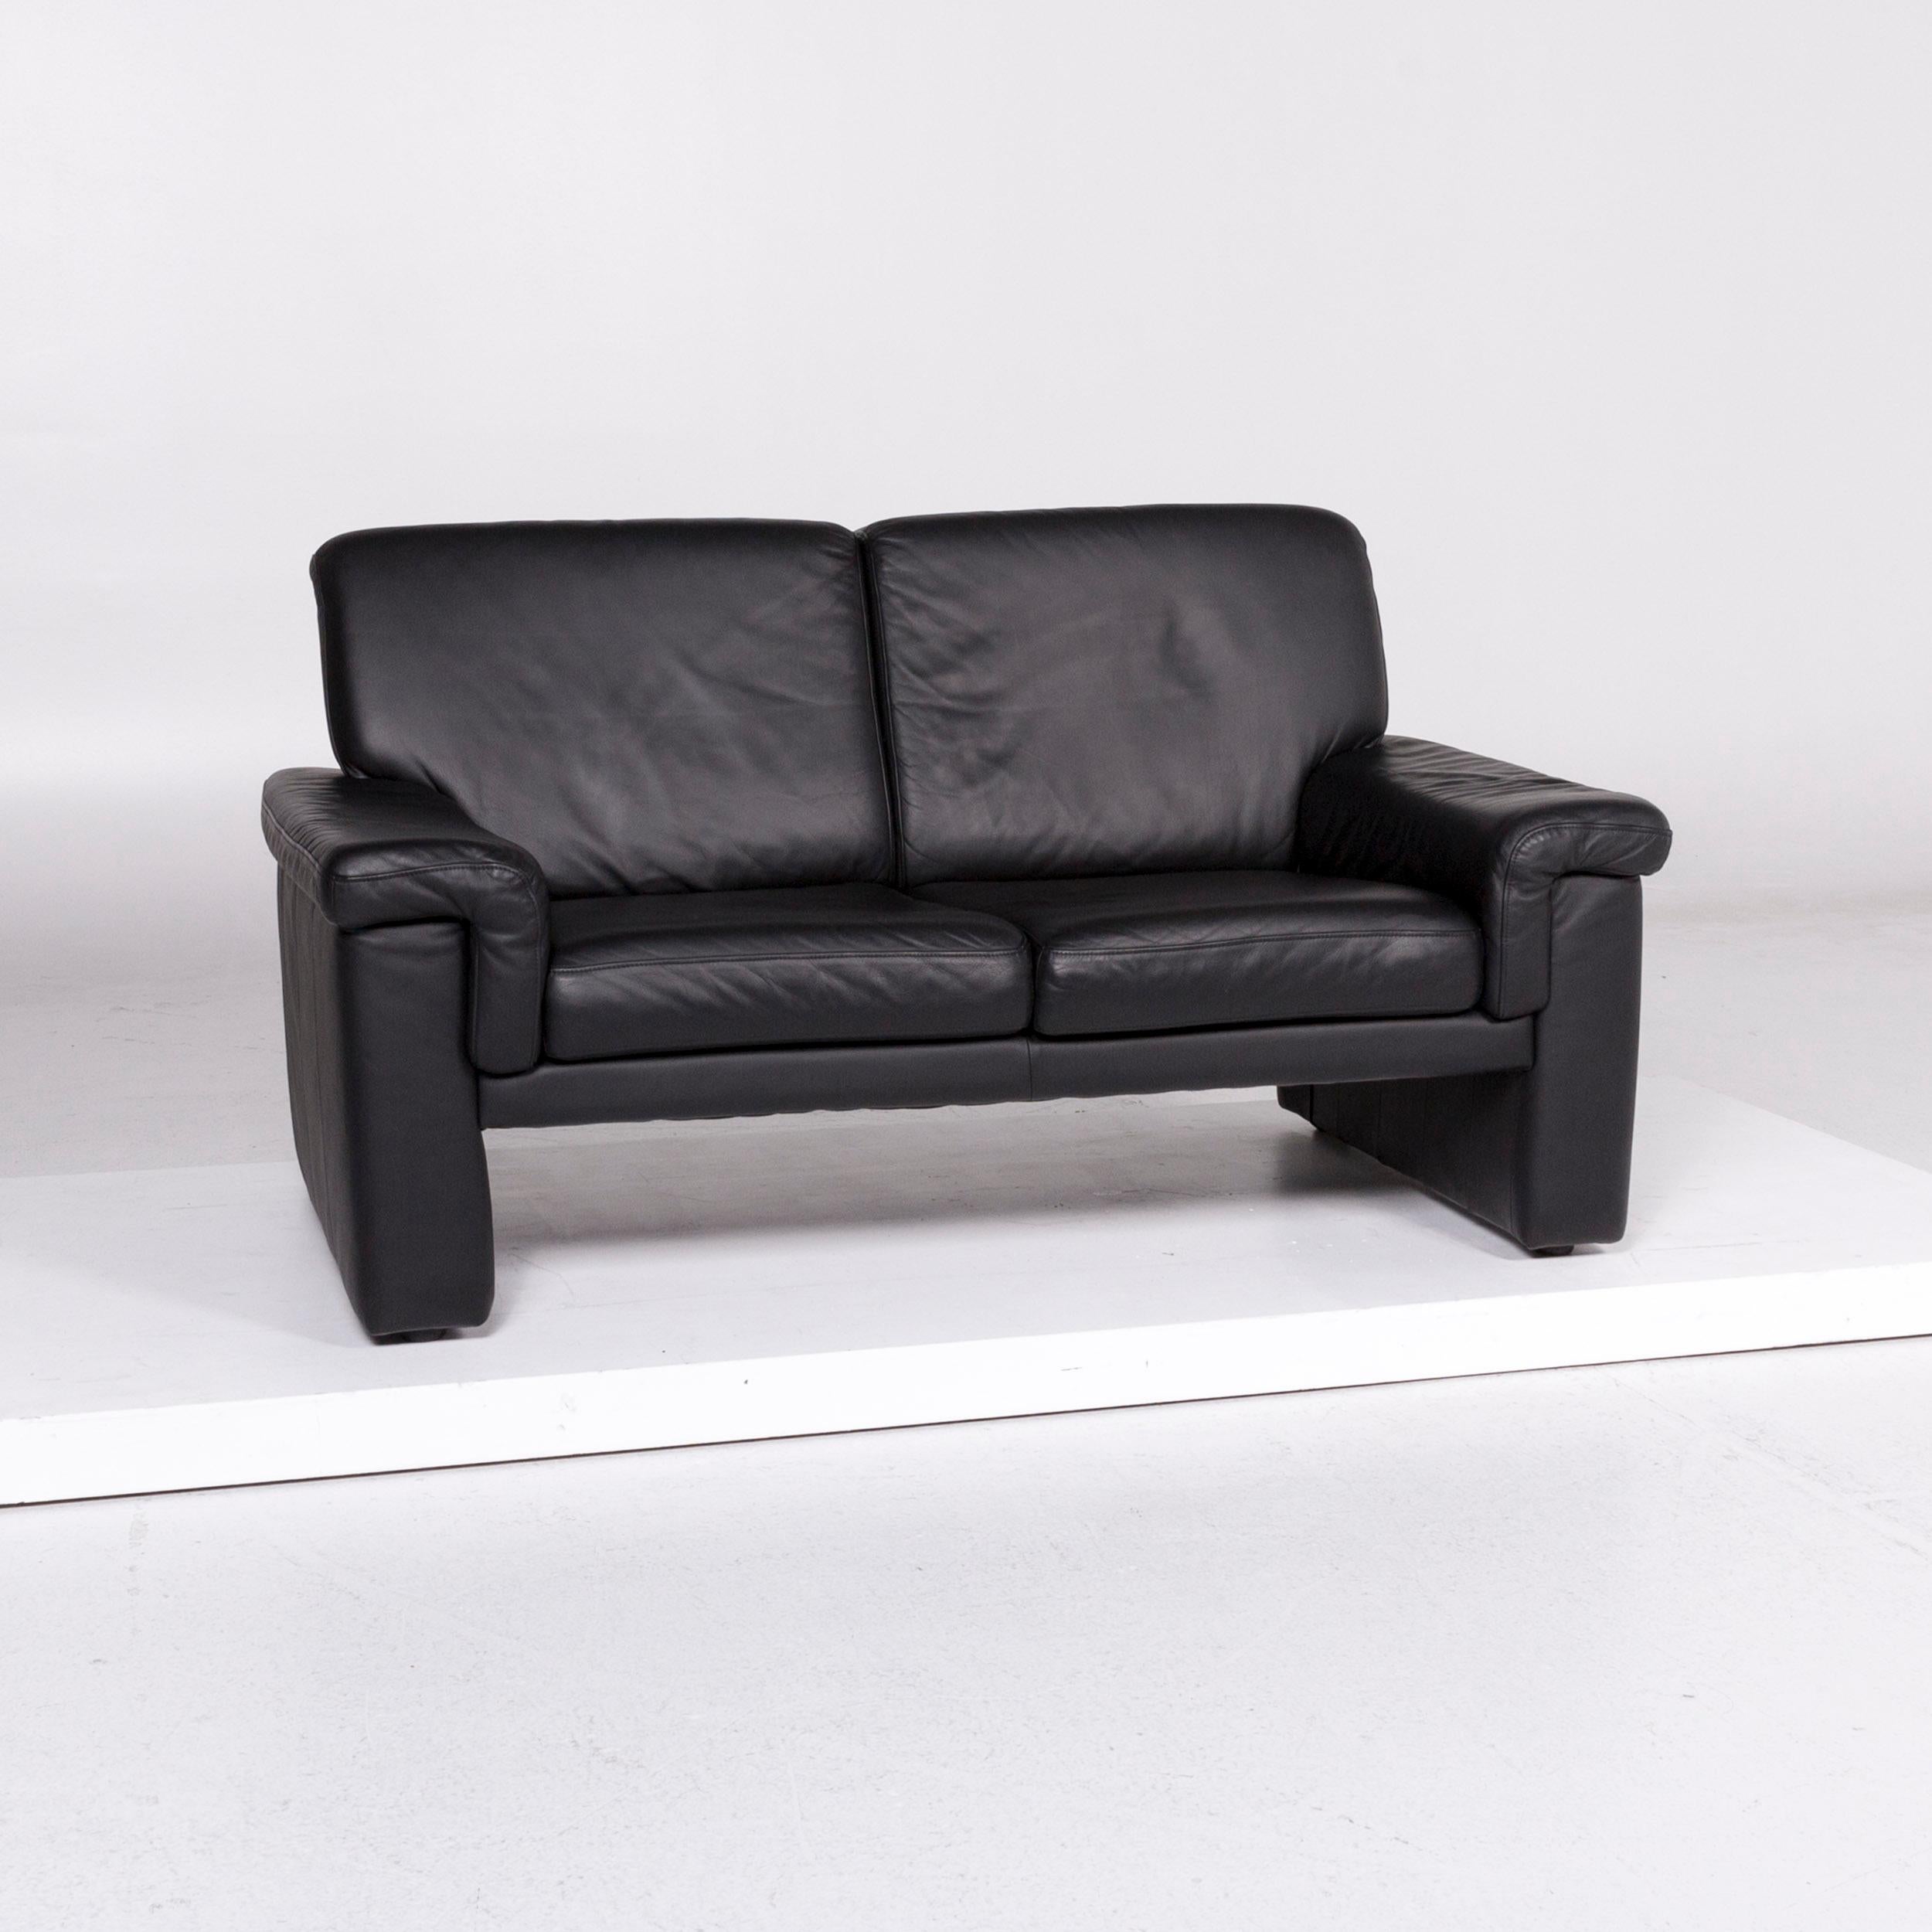 We bring to you a Laauser leather sofa black two-seat couch.
 
 Product measurements in centimeters:
 
Depth 87
Width 146
Height 83
Seat-height 41
Rest-height 50
Seat-depth 55
Seat-width 102
Back-height 42.
     